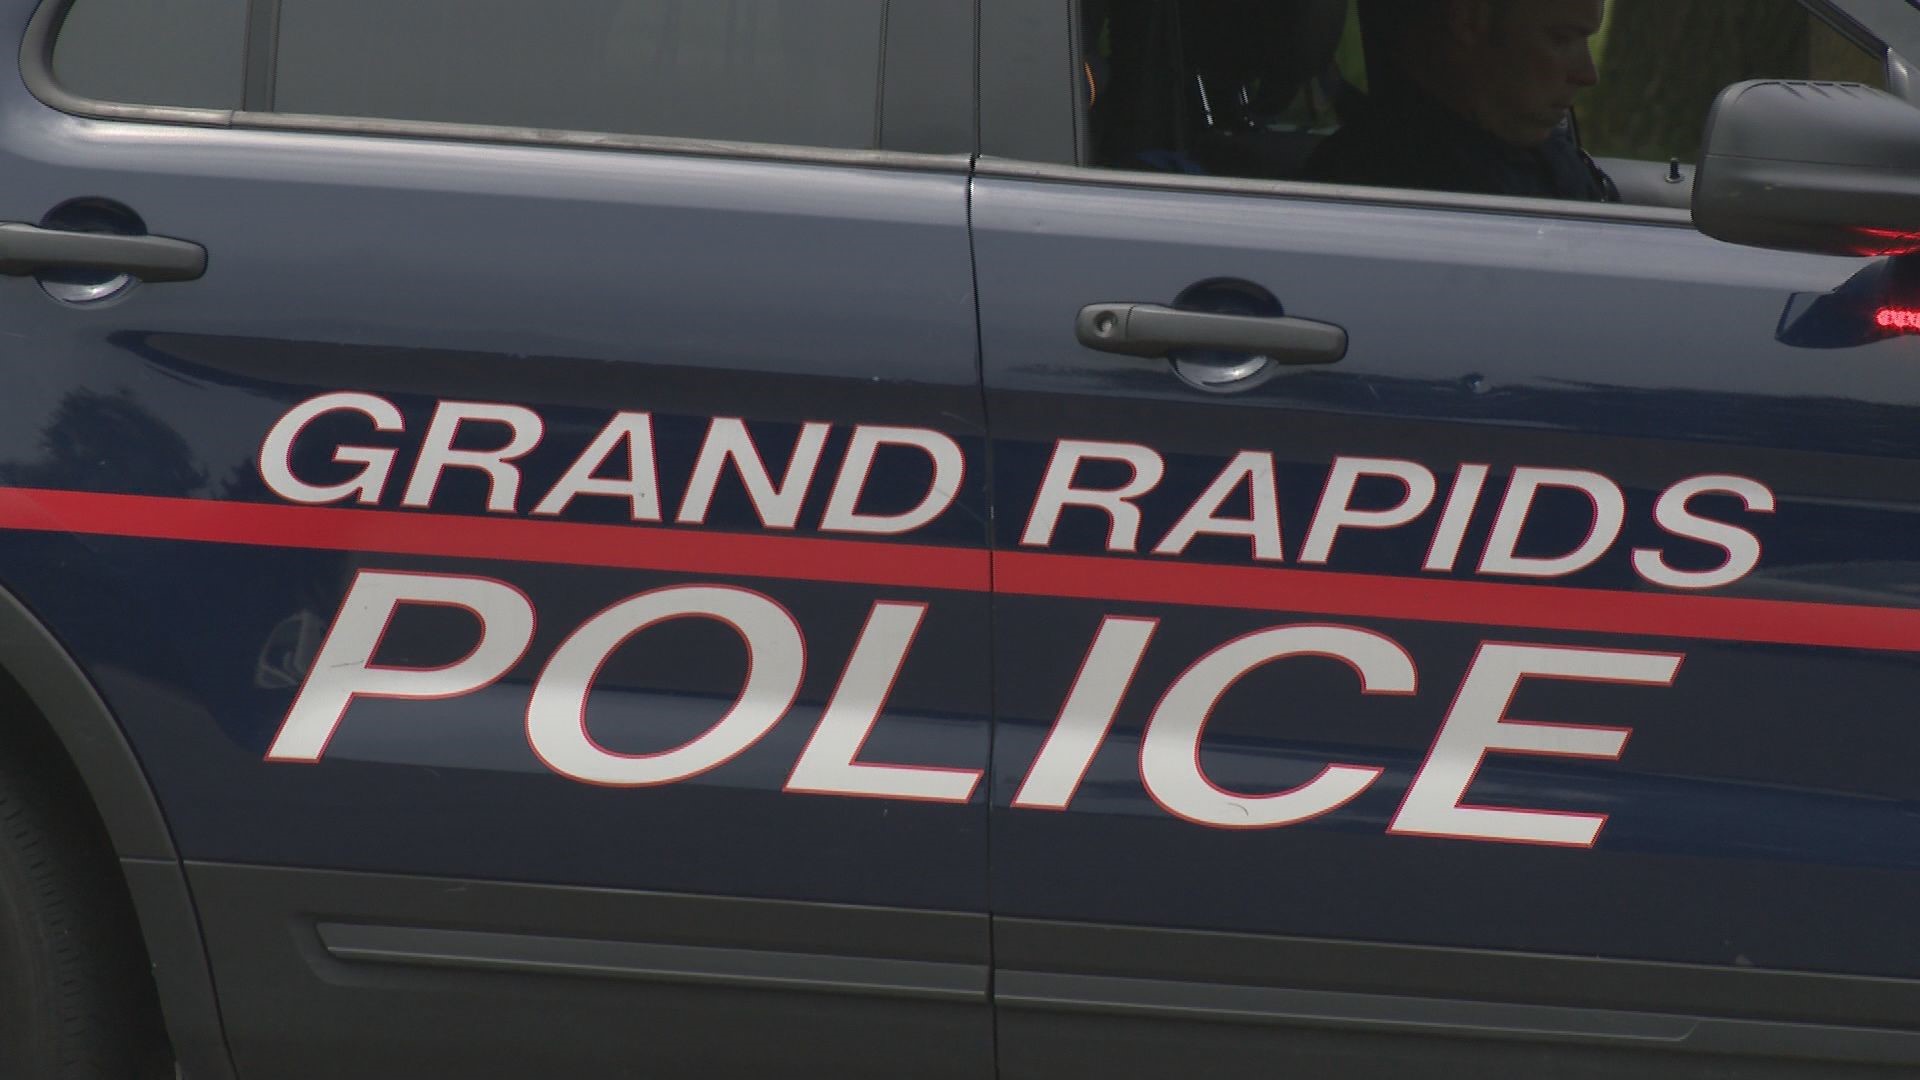 The court unanimously said Grand Rapids police violated the Fourth Amendment protection against unreasonable search and seizure.